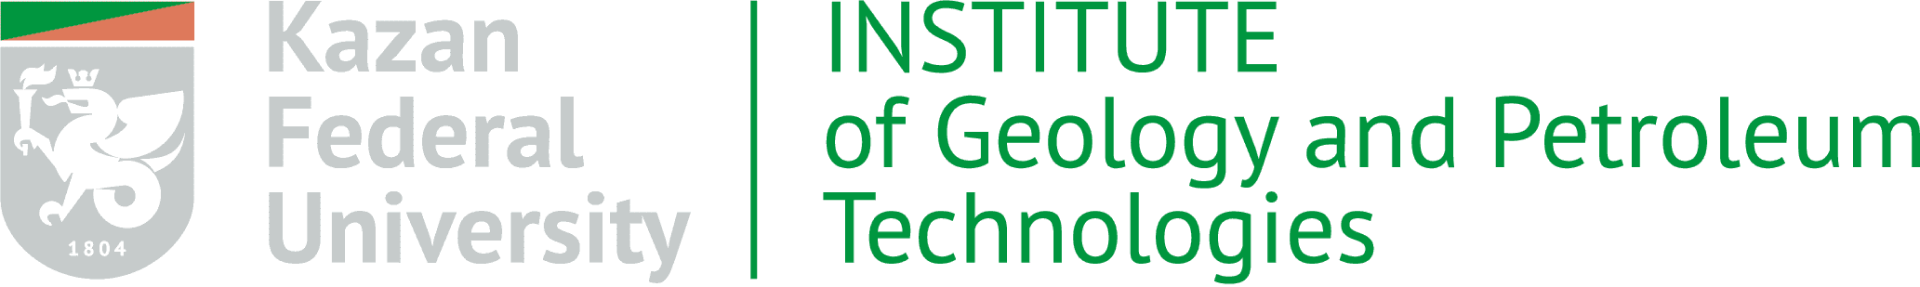 Institute of Geology and Petroleum Technologies